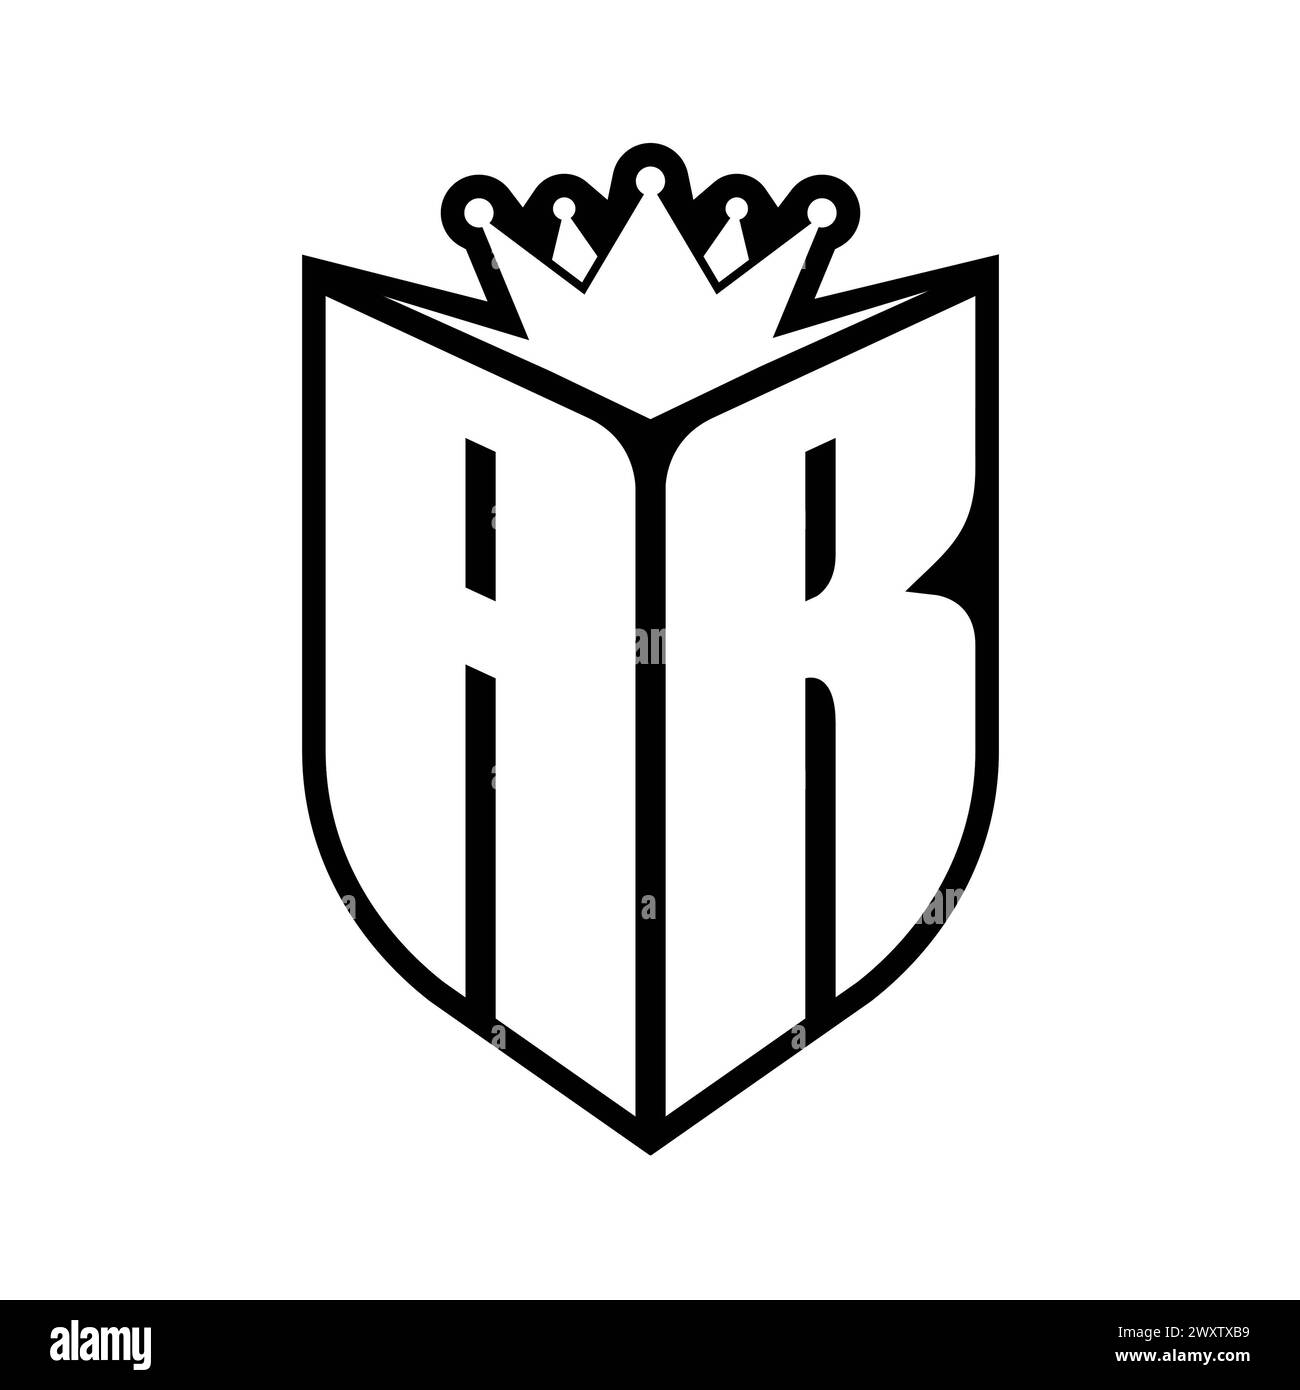 AR Letter bold monogram with shield shape and sharp crown inside shield black and white color design template Stock Photo